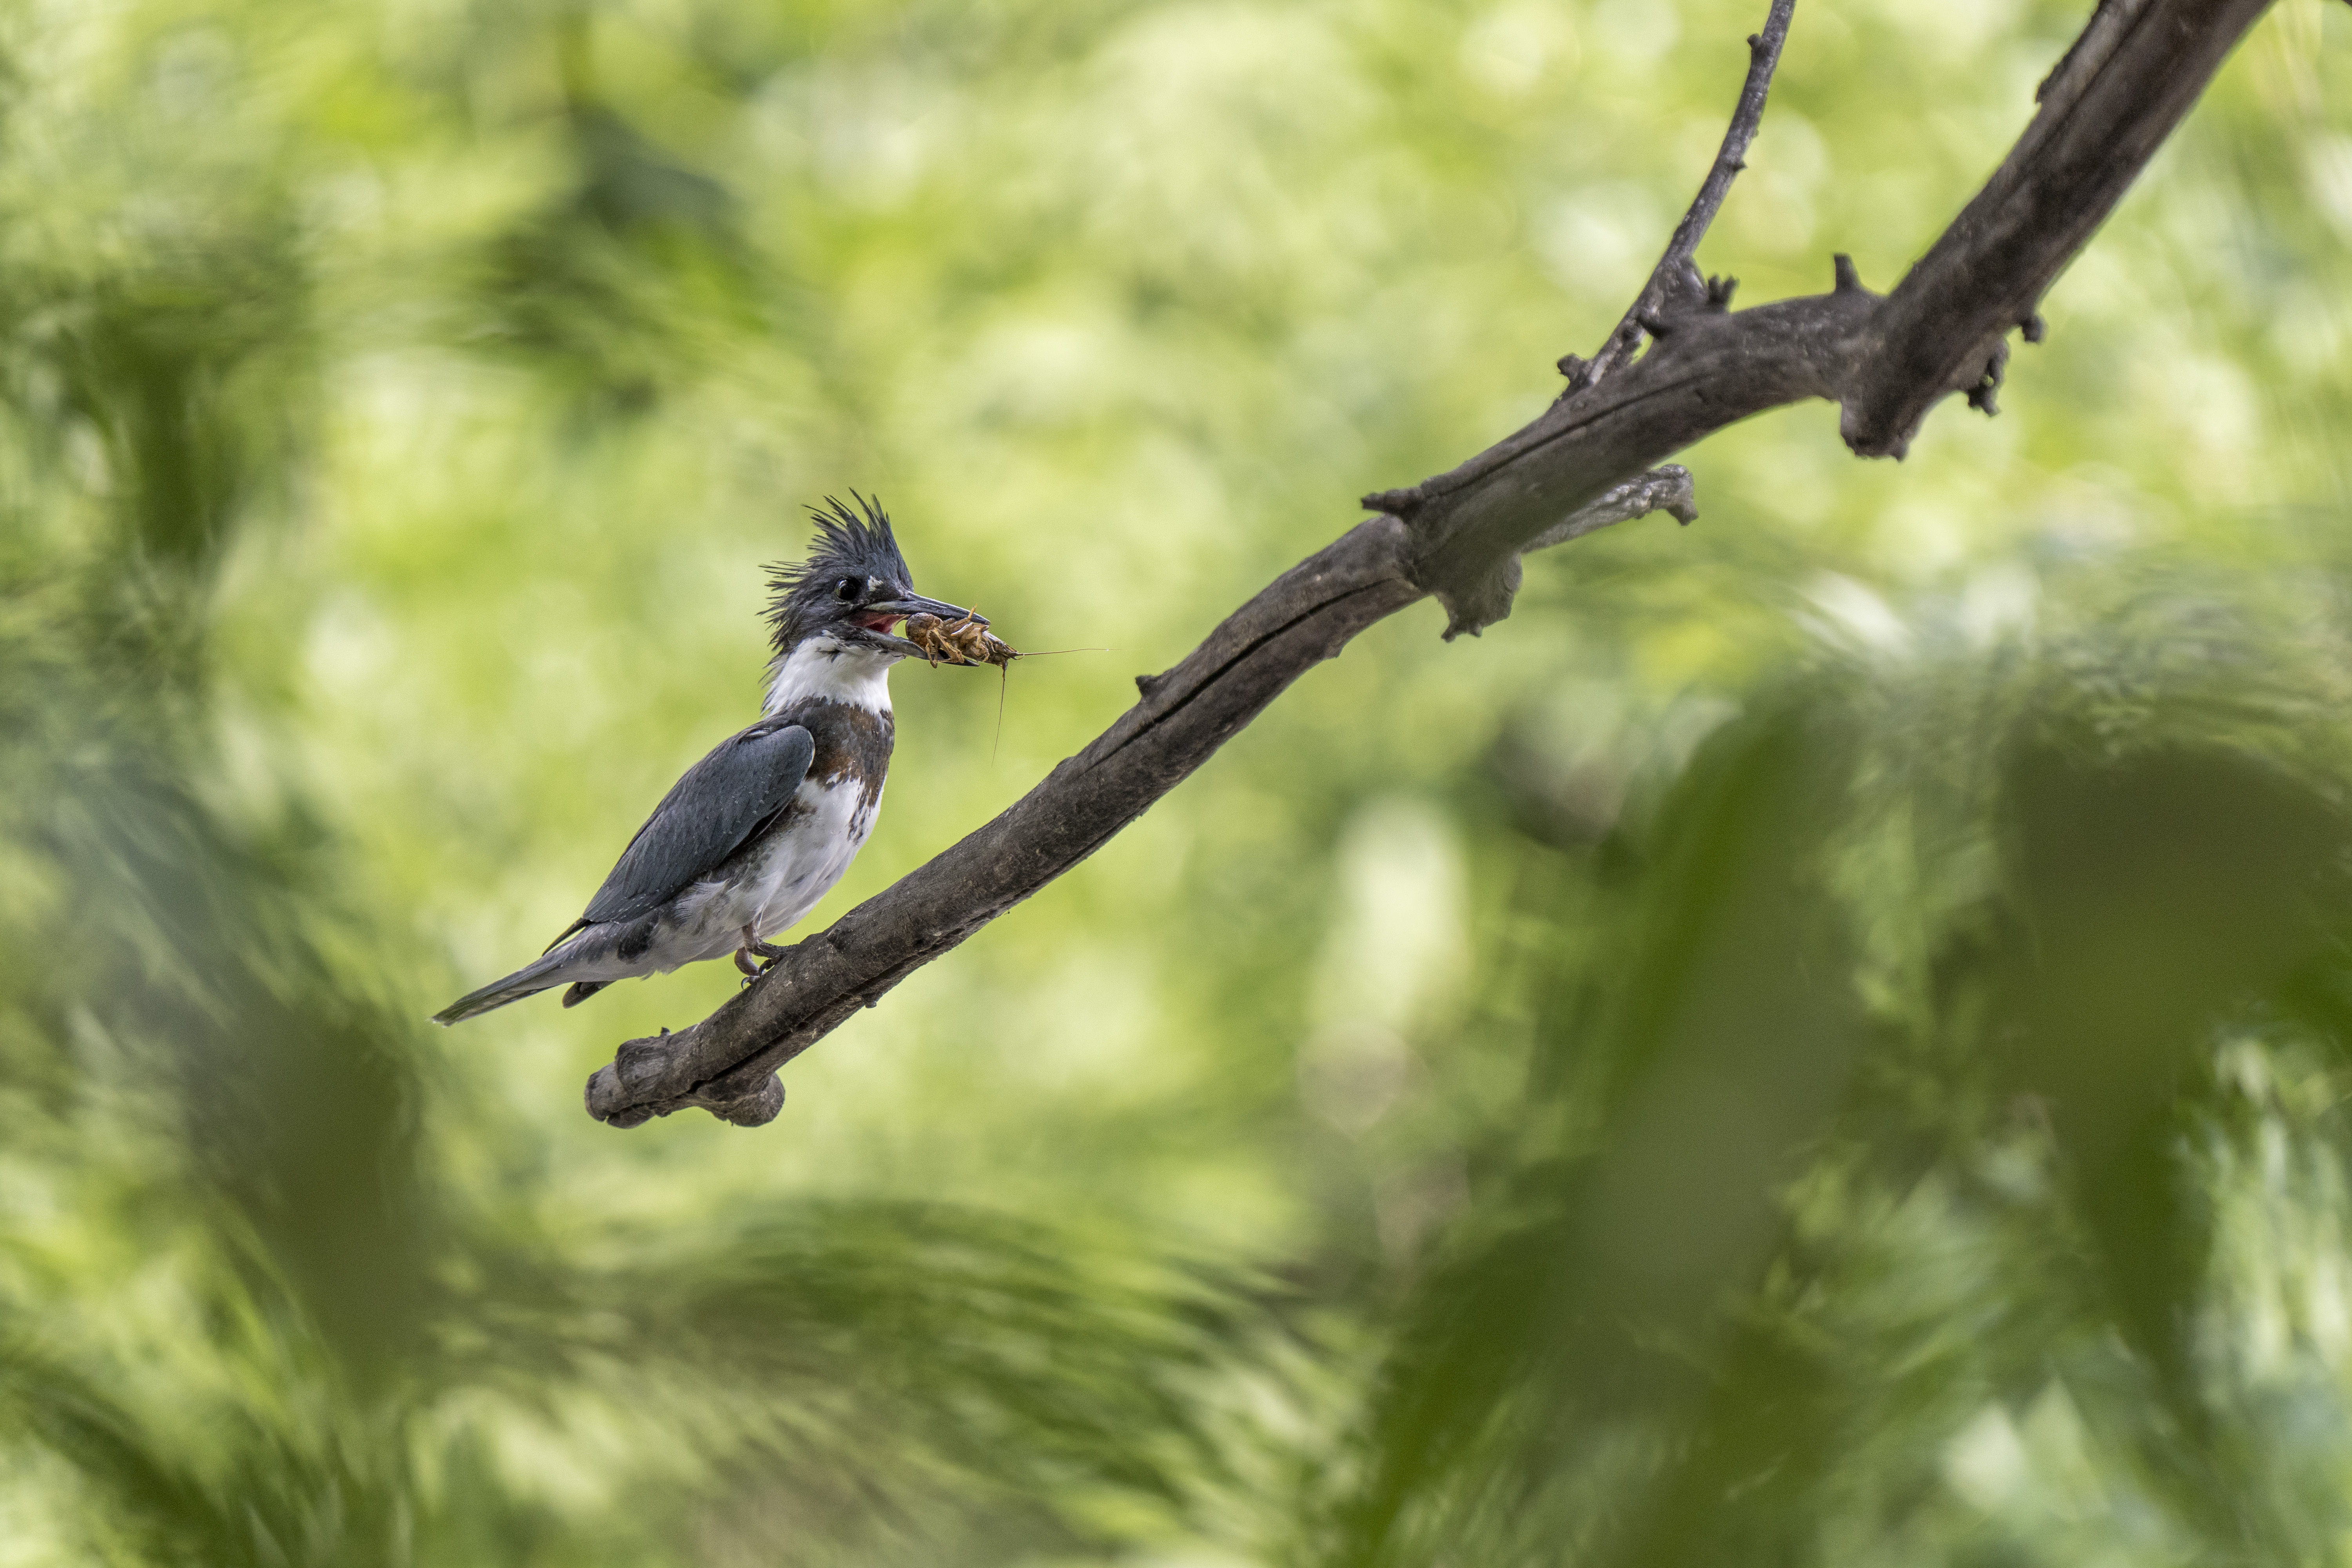 Belted Kingfisher sitting on a branch with food in its bill. Green background.